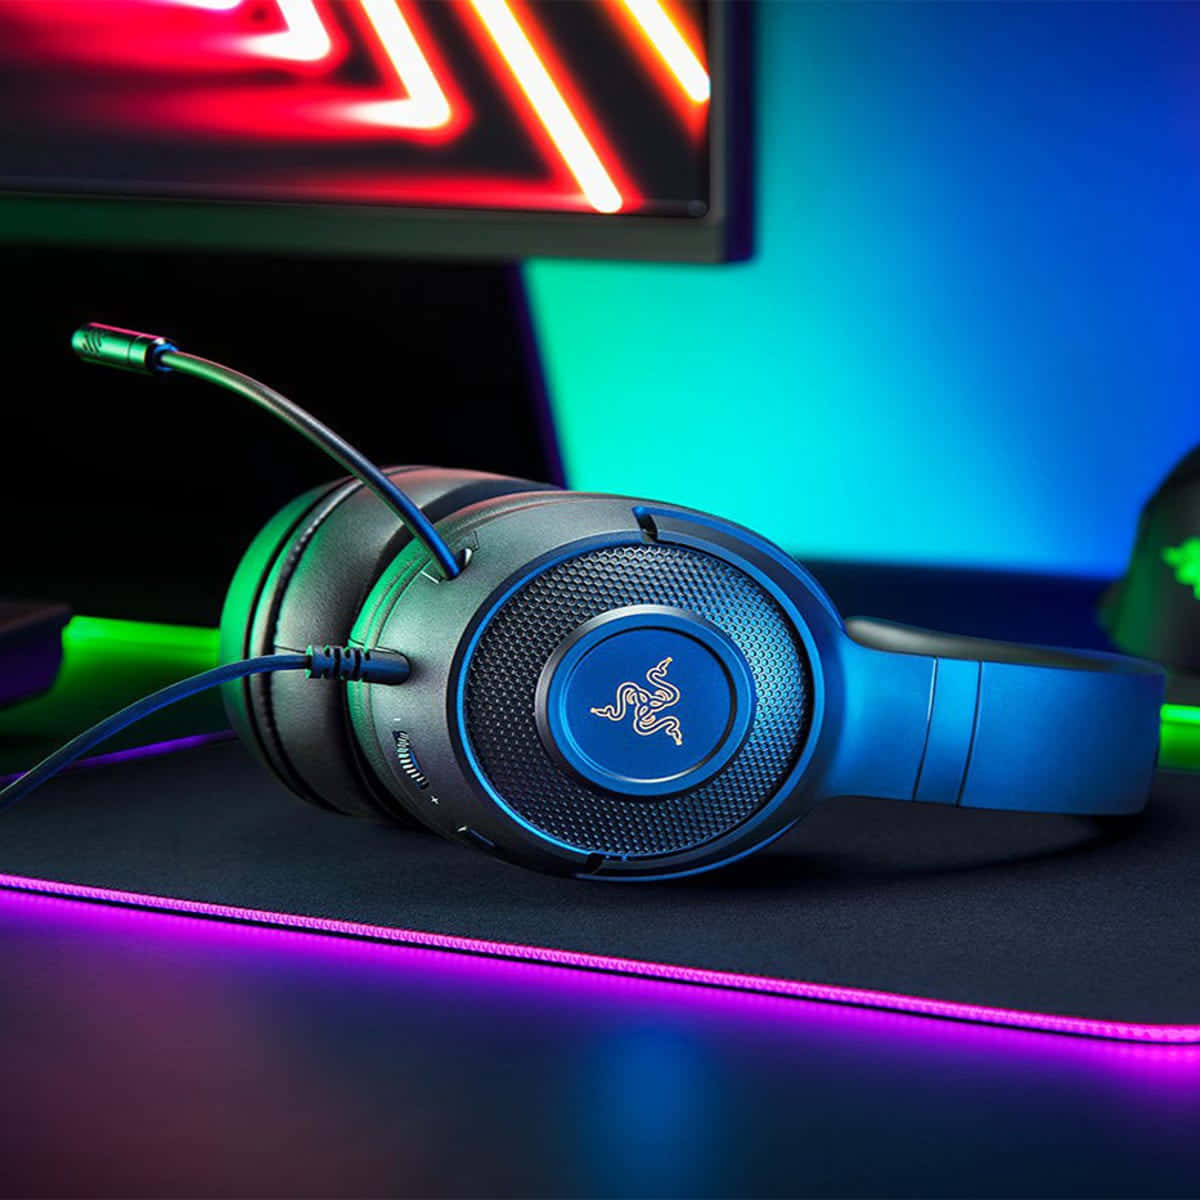 Experience the On-Trend Desirable Gaming Headsets" Wallpaper